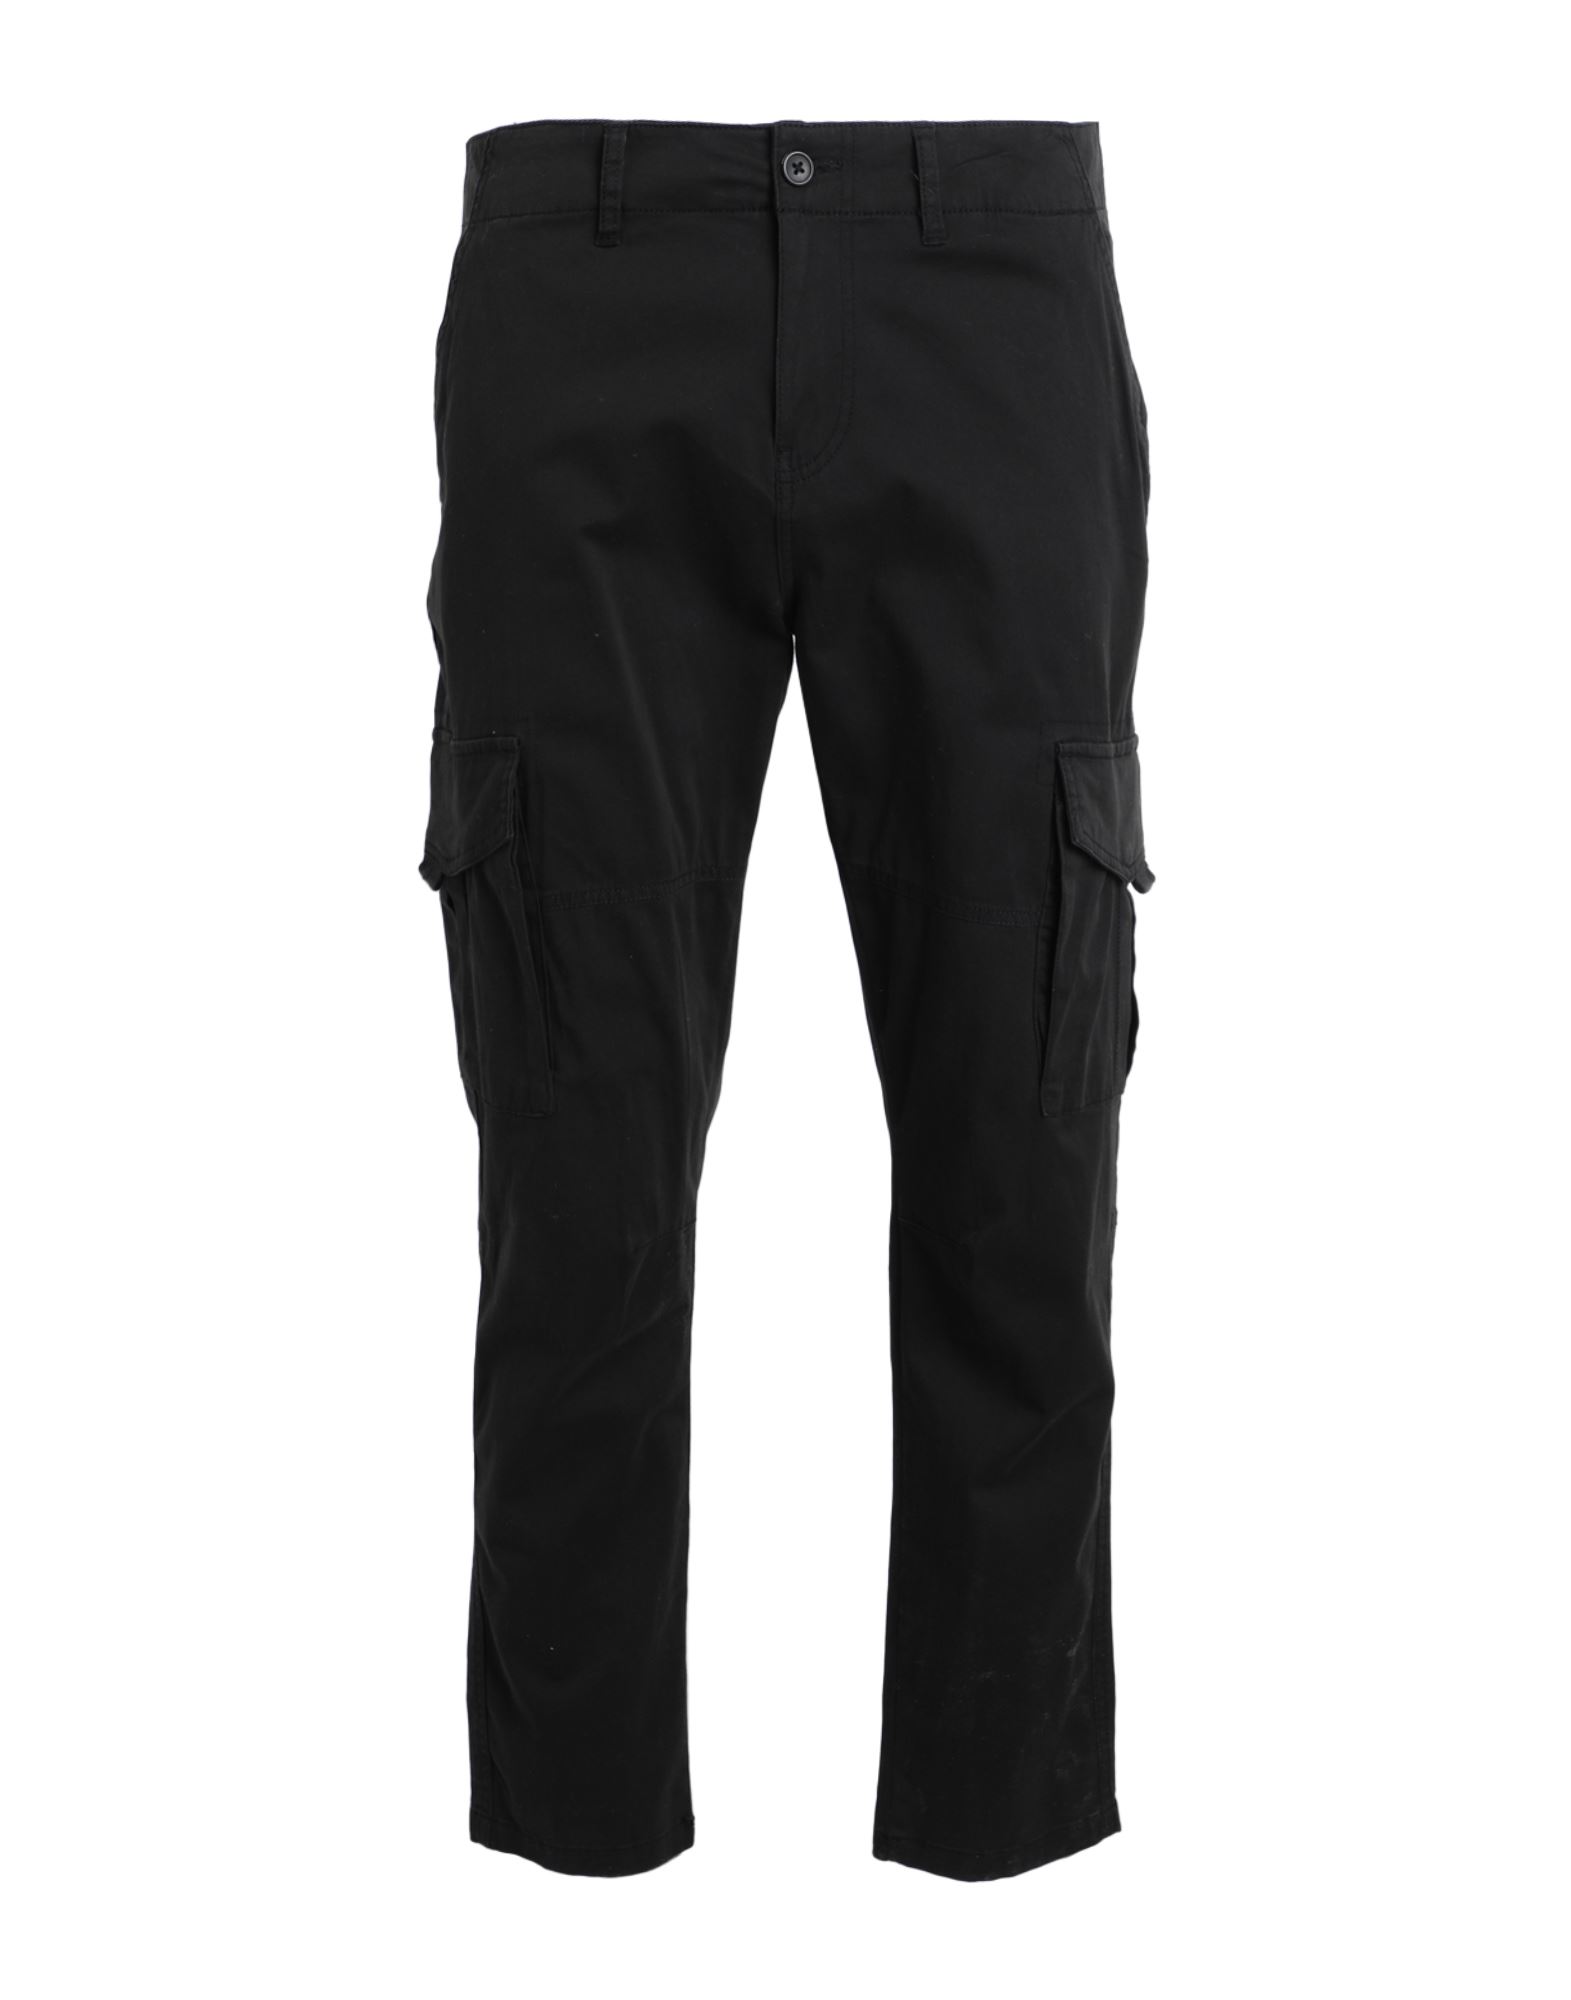 Only & Sons Man Pants Black Size 31w-32l Cotton, Recycled Cotton, Elastane